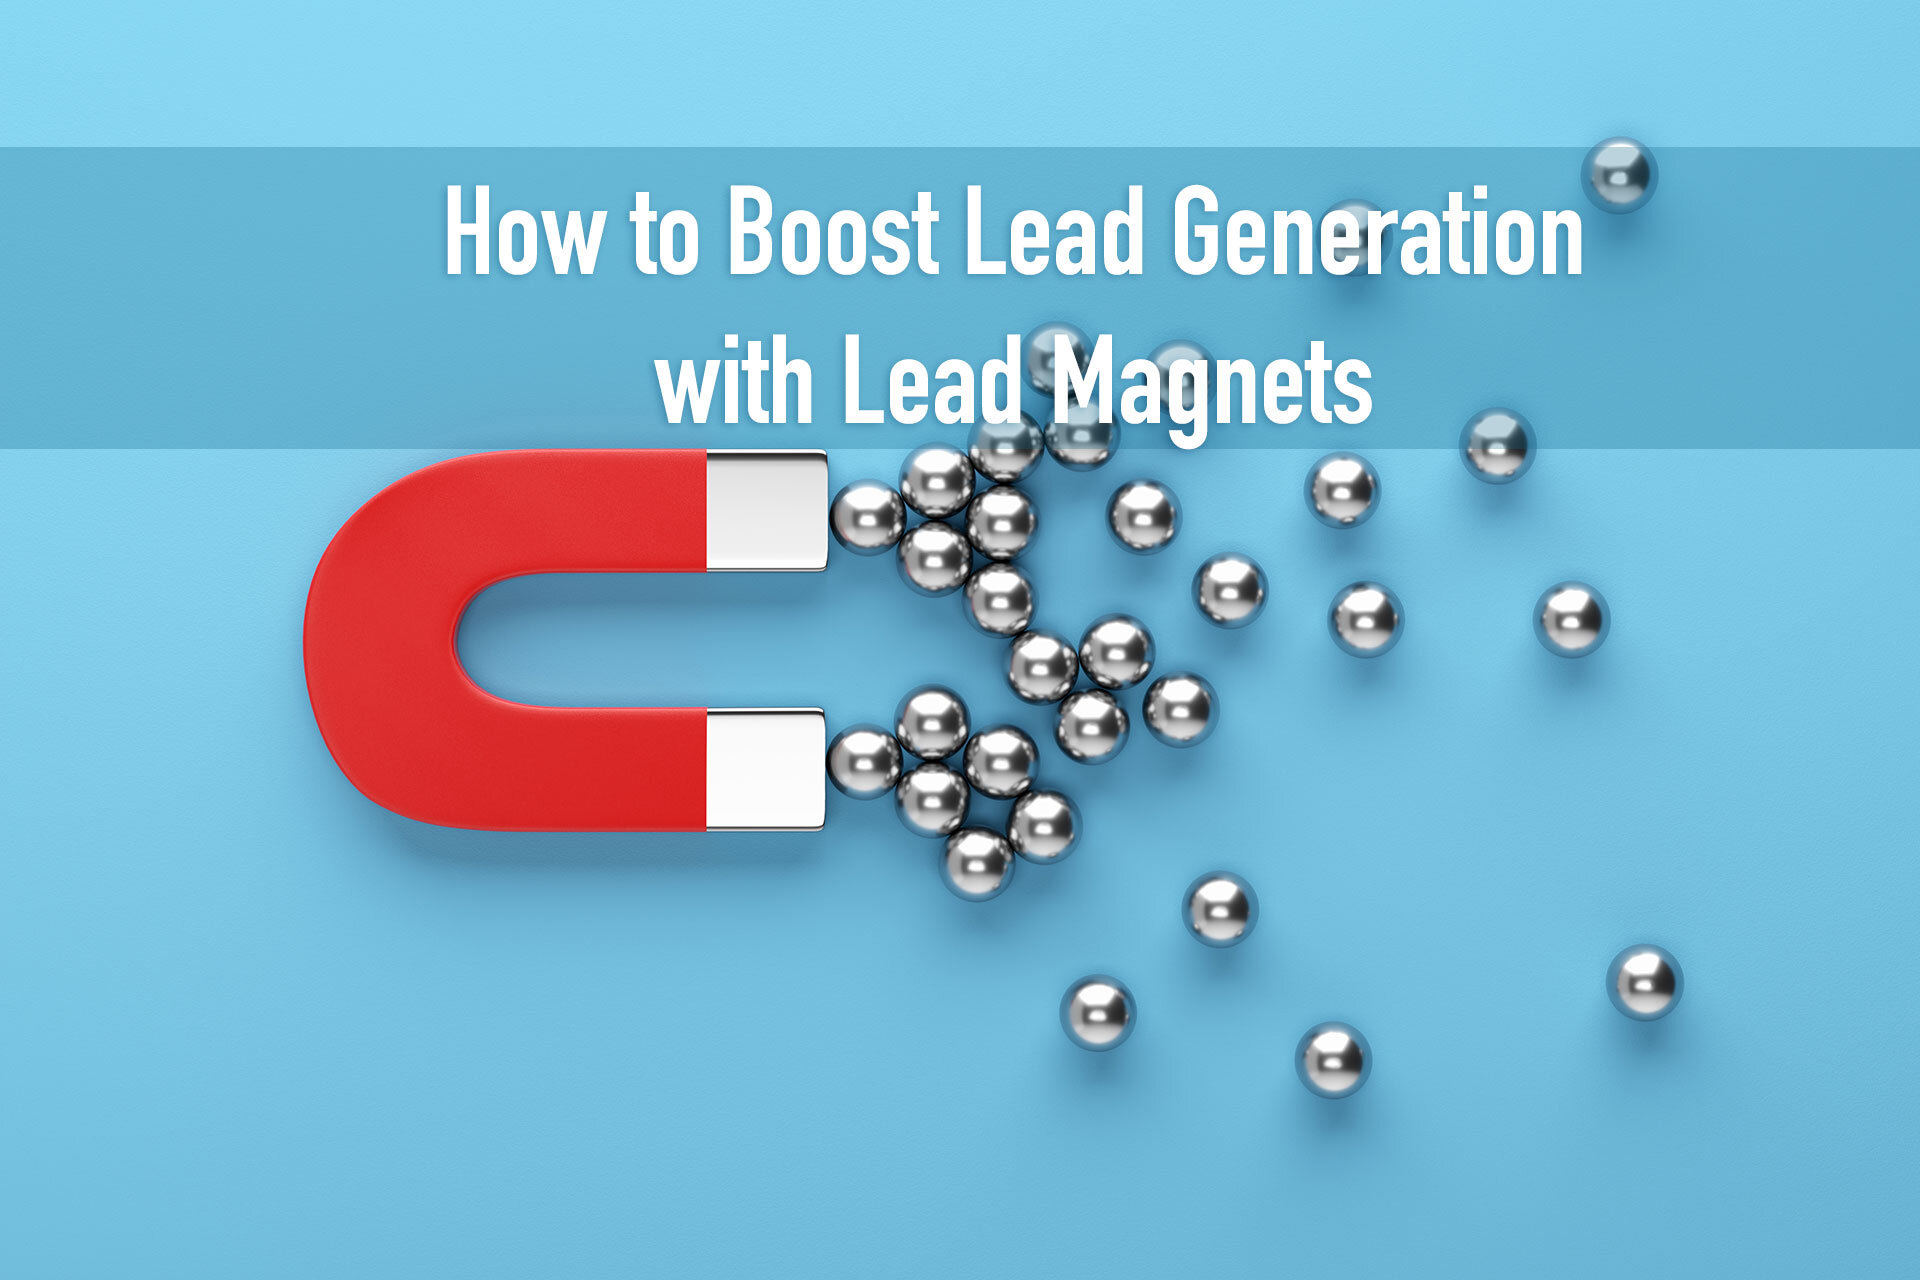 How to boost lead generation with lead magnets